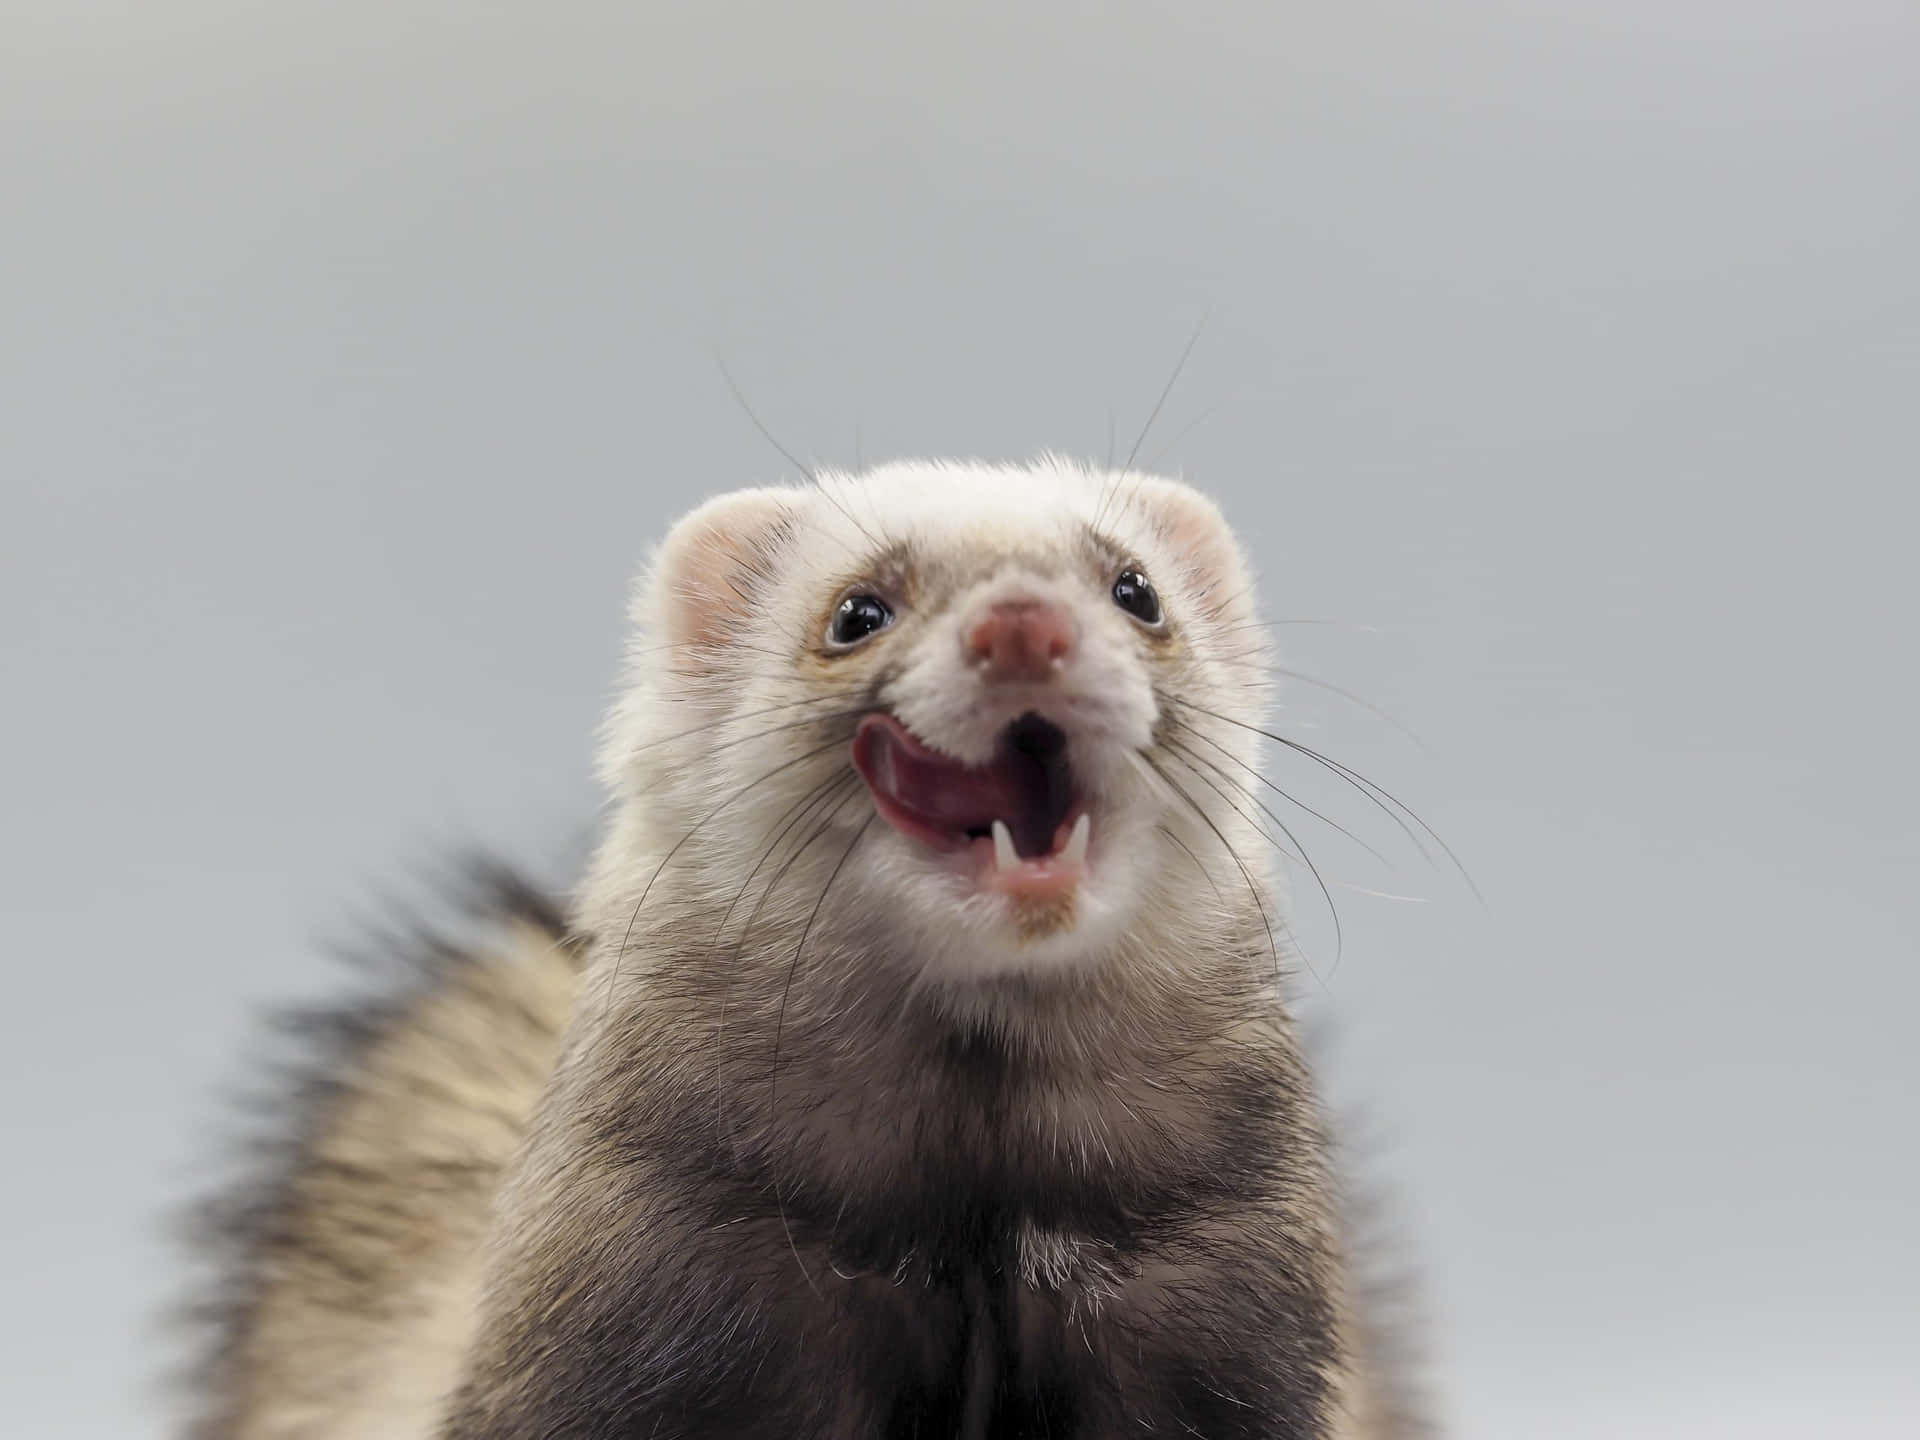 Ferret - A Ferret With Its Mouth Open